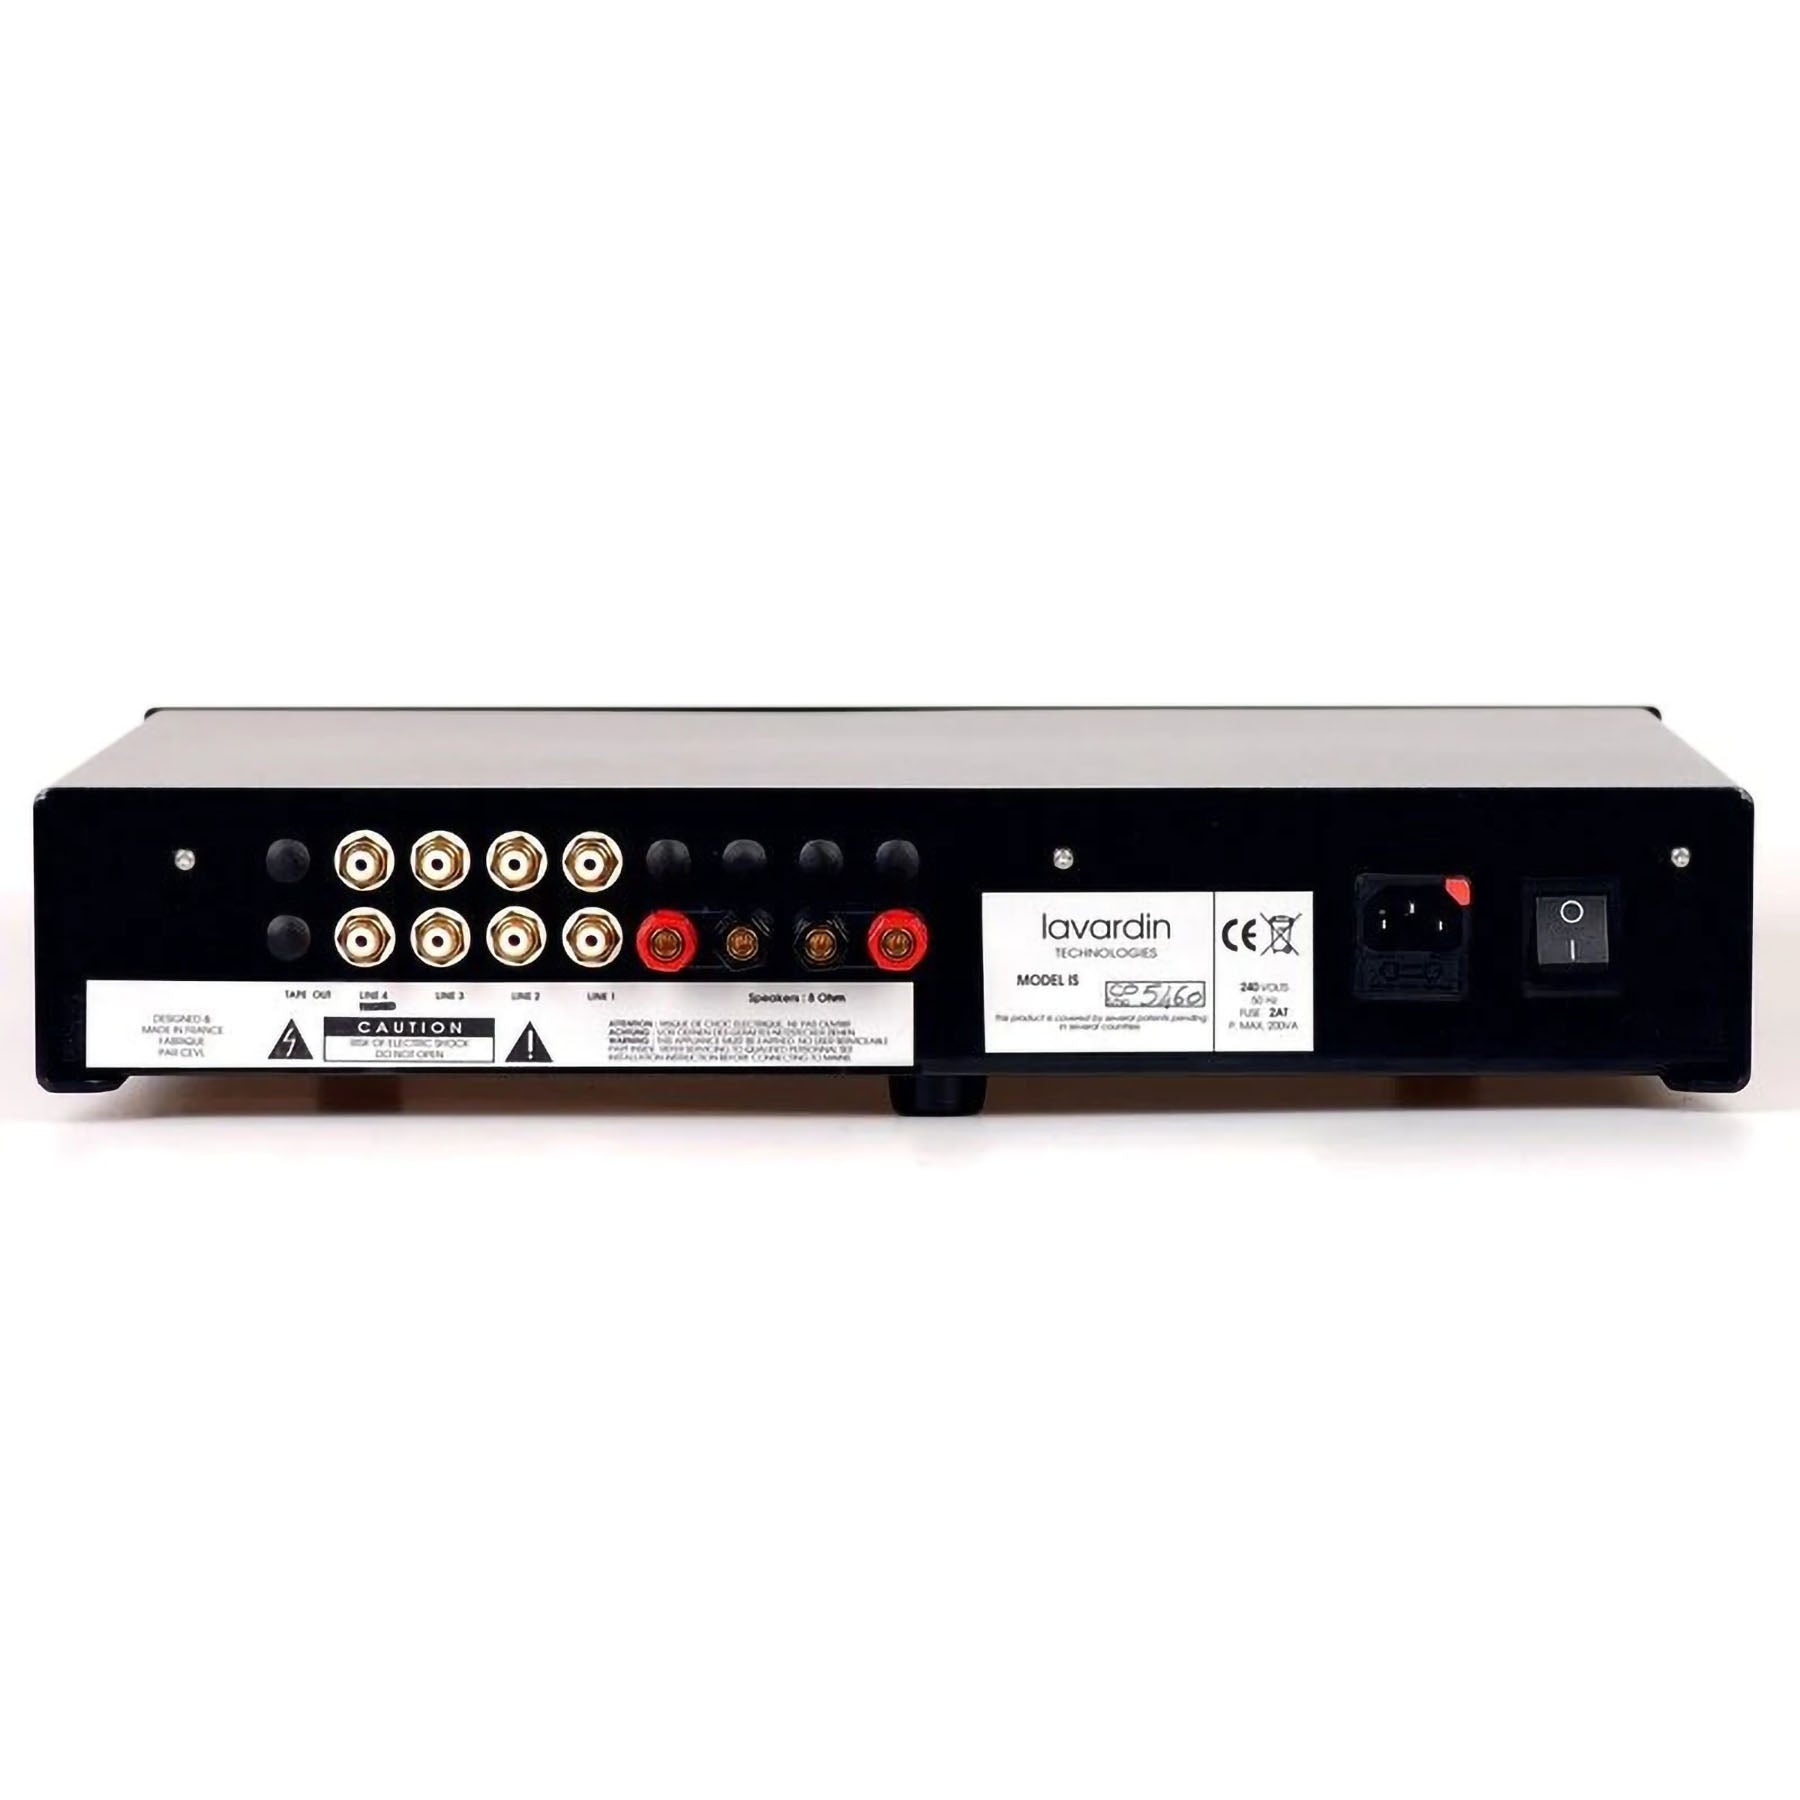 Lavardin ISx Stereo Integrated Amplifier